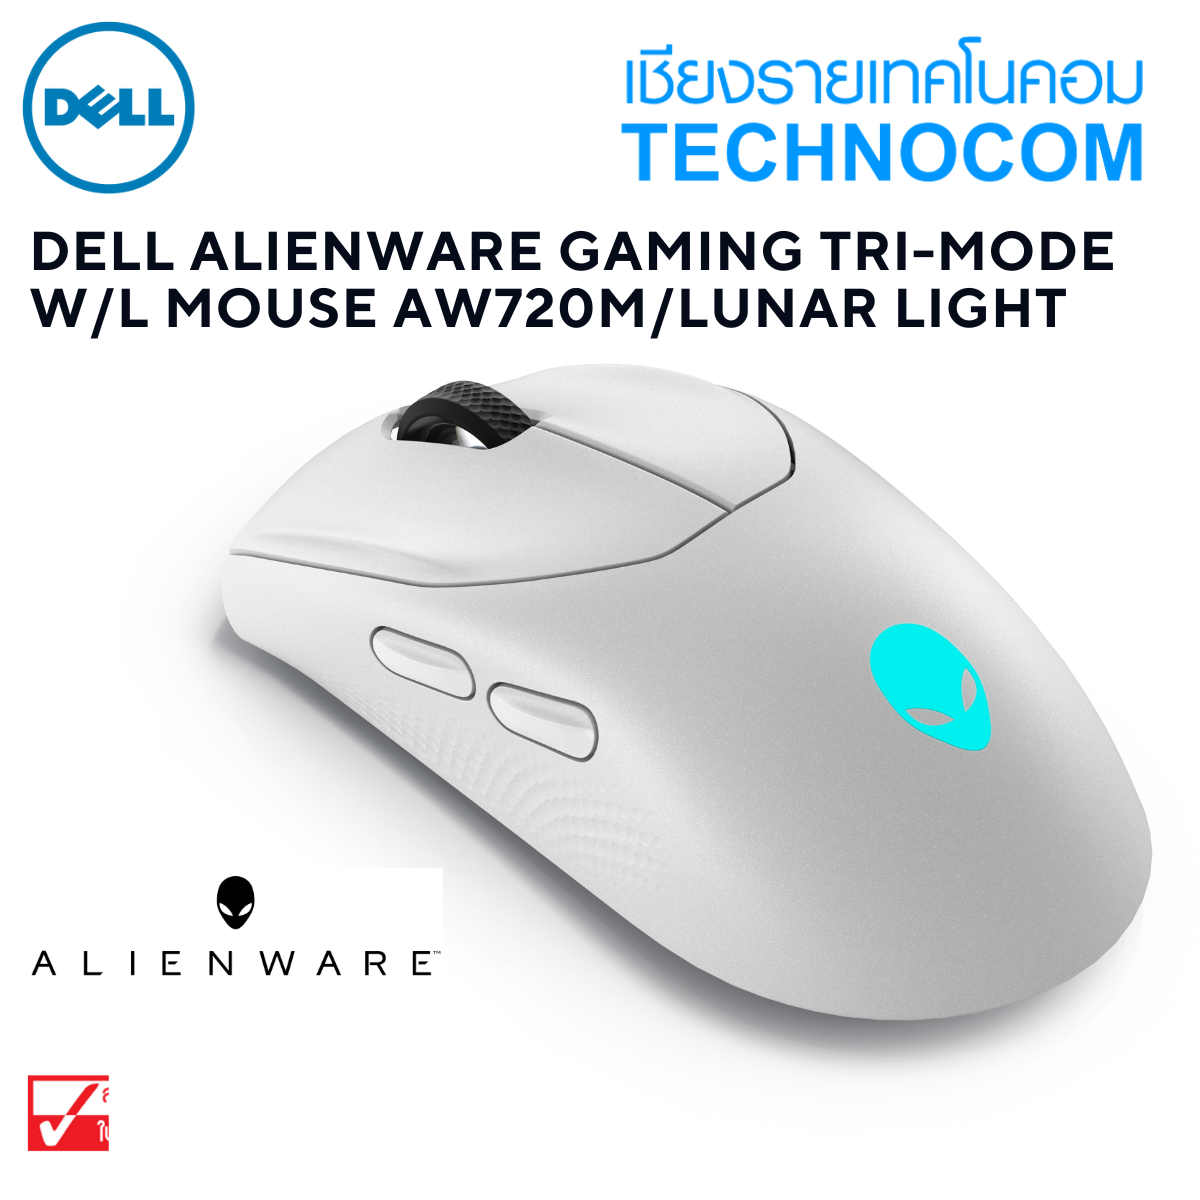 DELL ALIENWARE GAMING TRI-MODE W/L MOUSE AW720M/LUNAR LIGHT